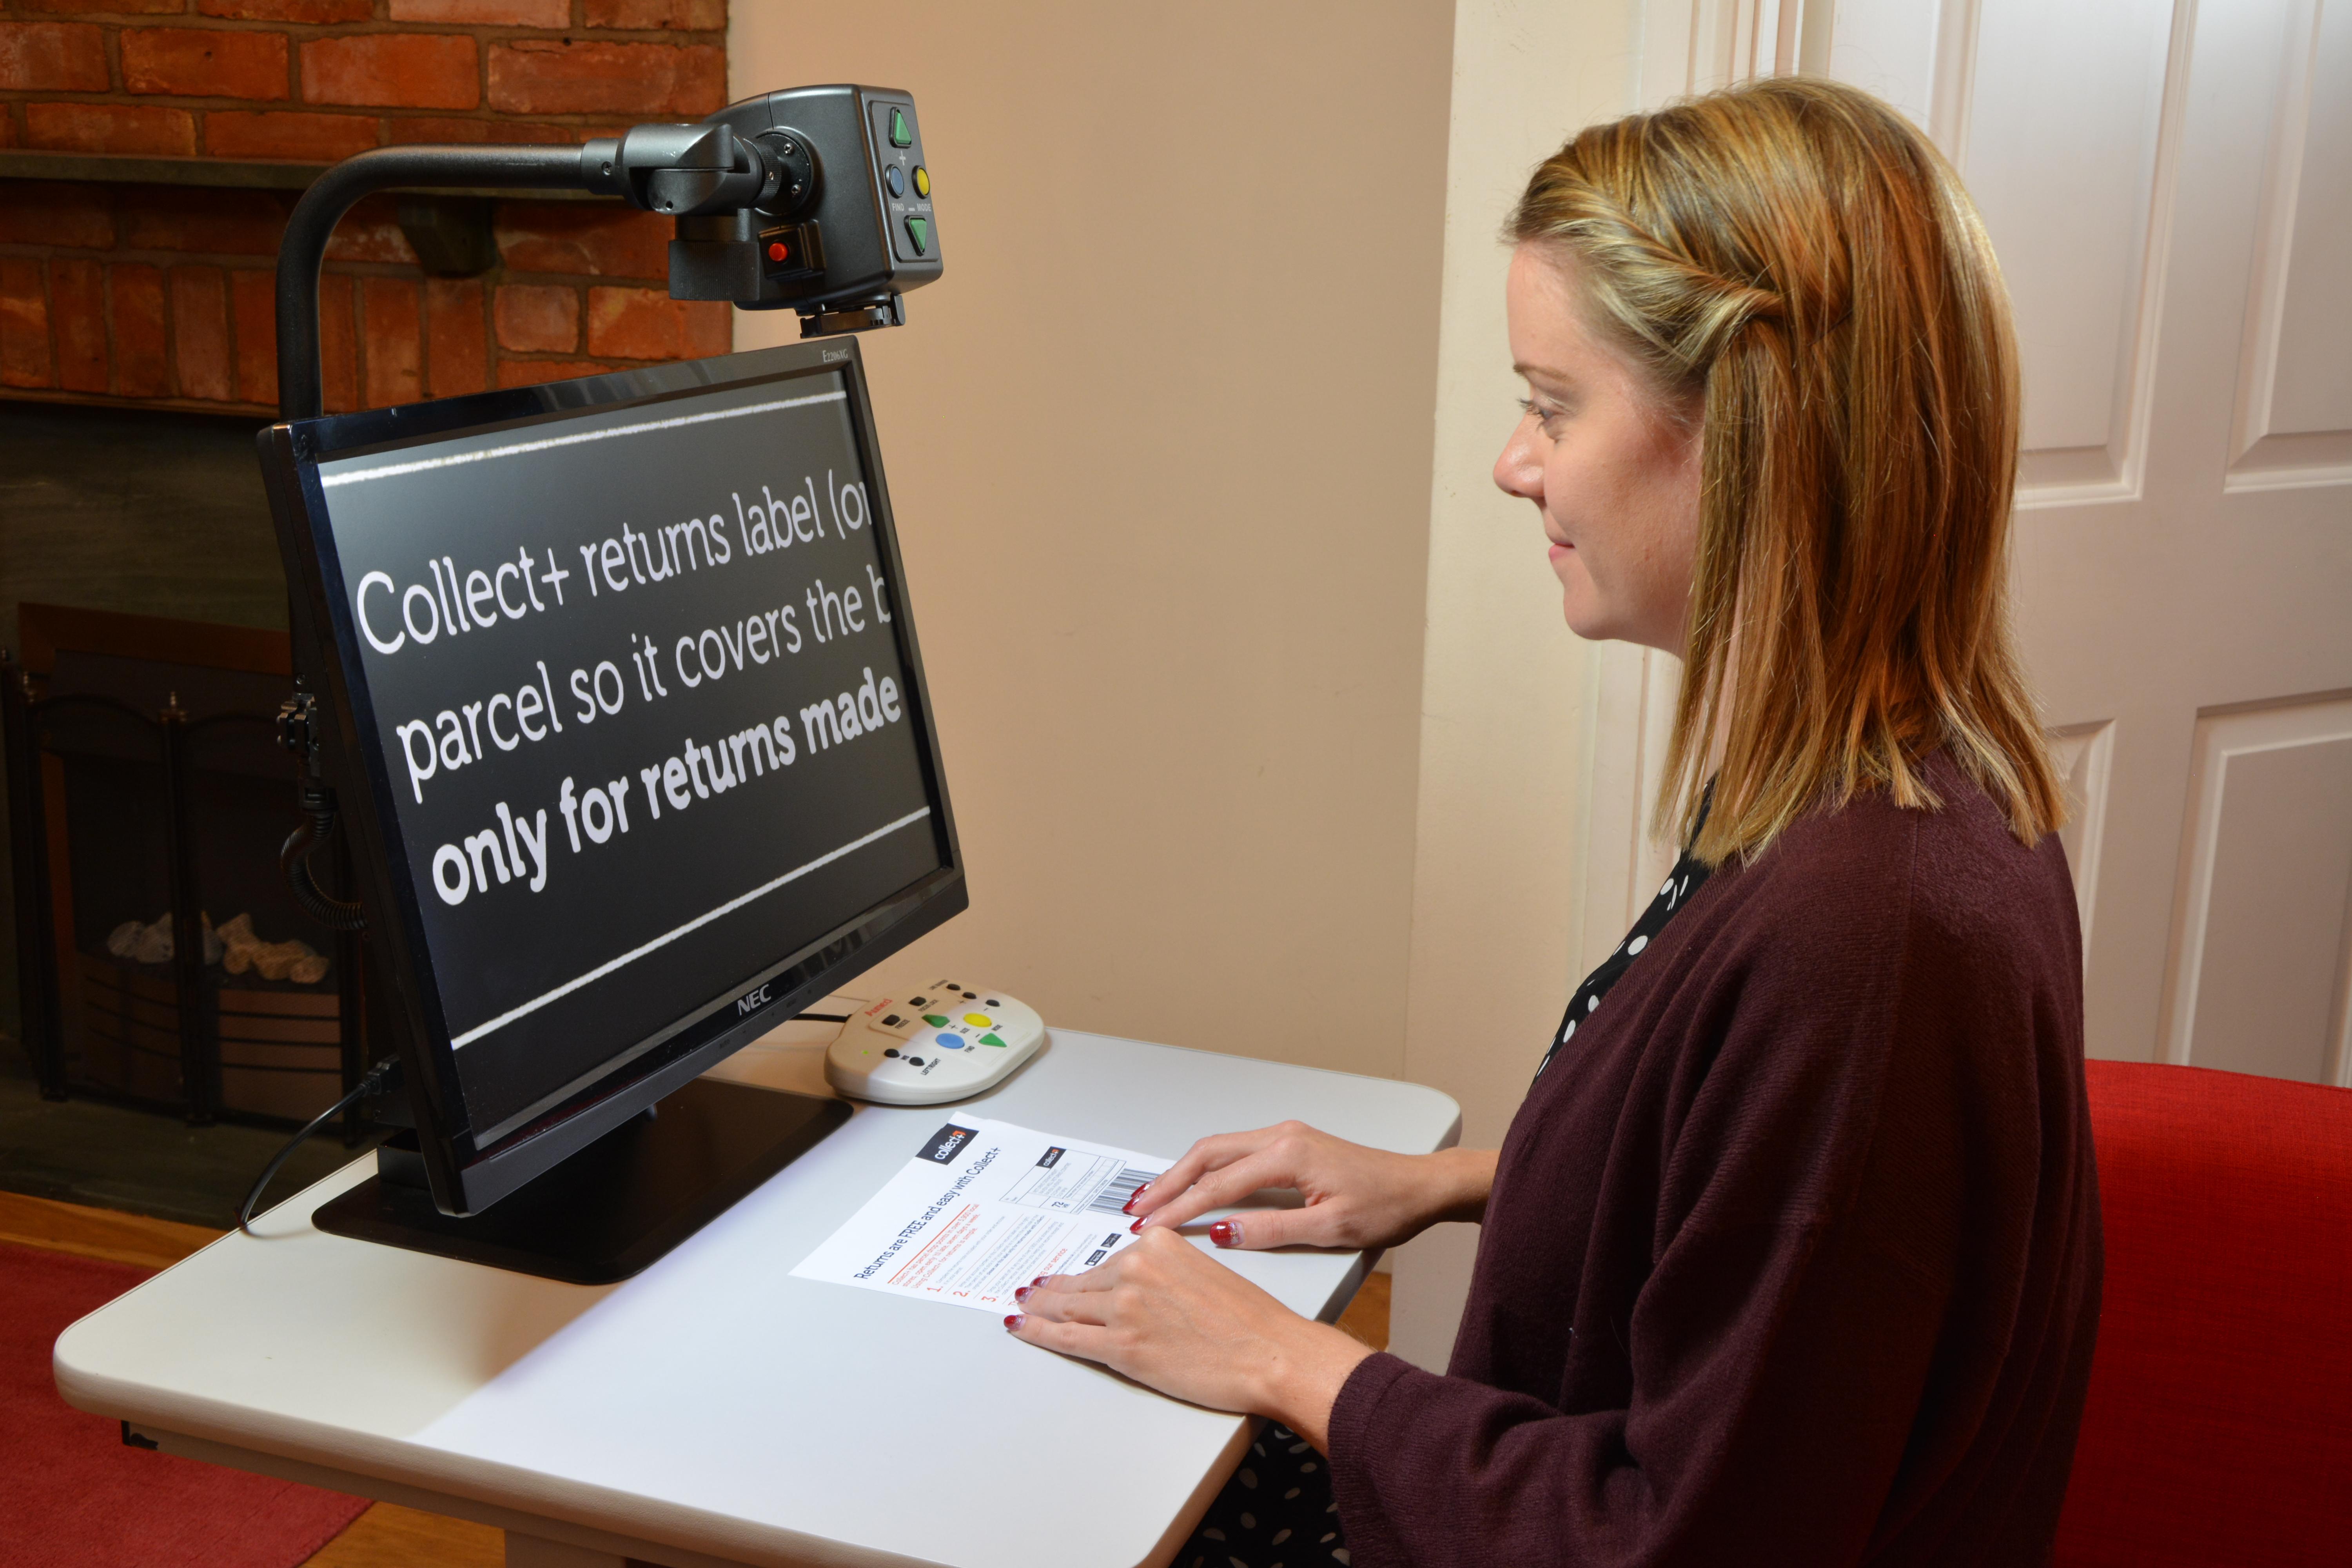 A lady sat using the digimax to read a returns label